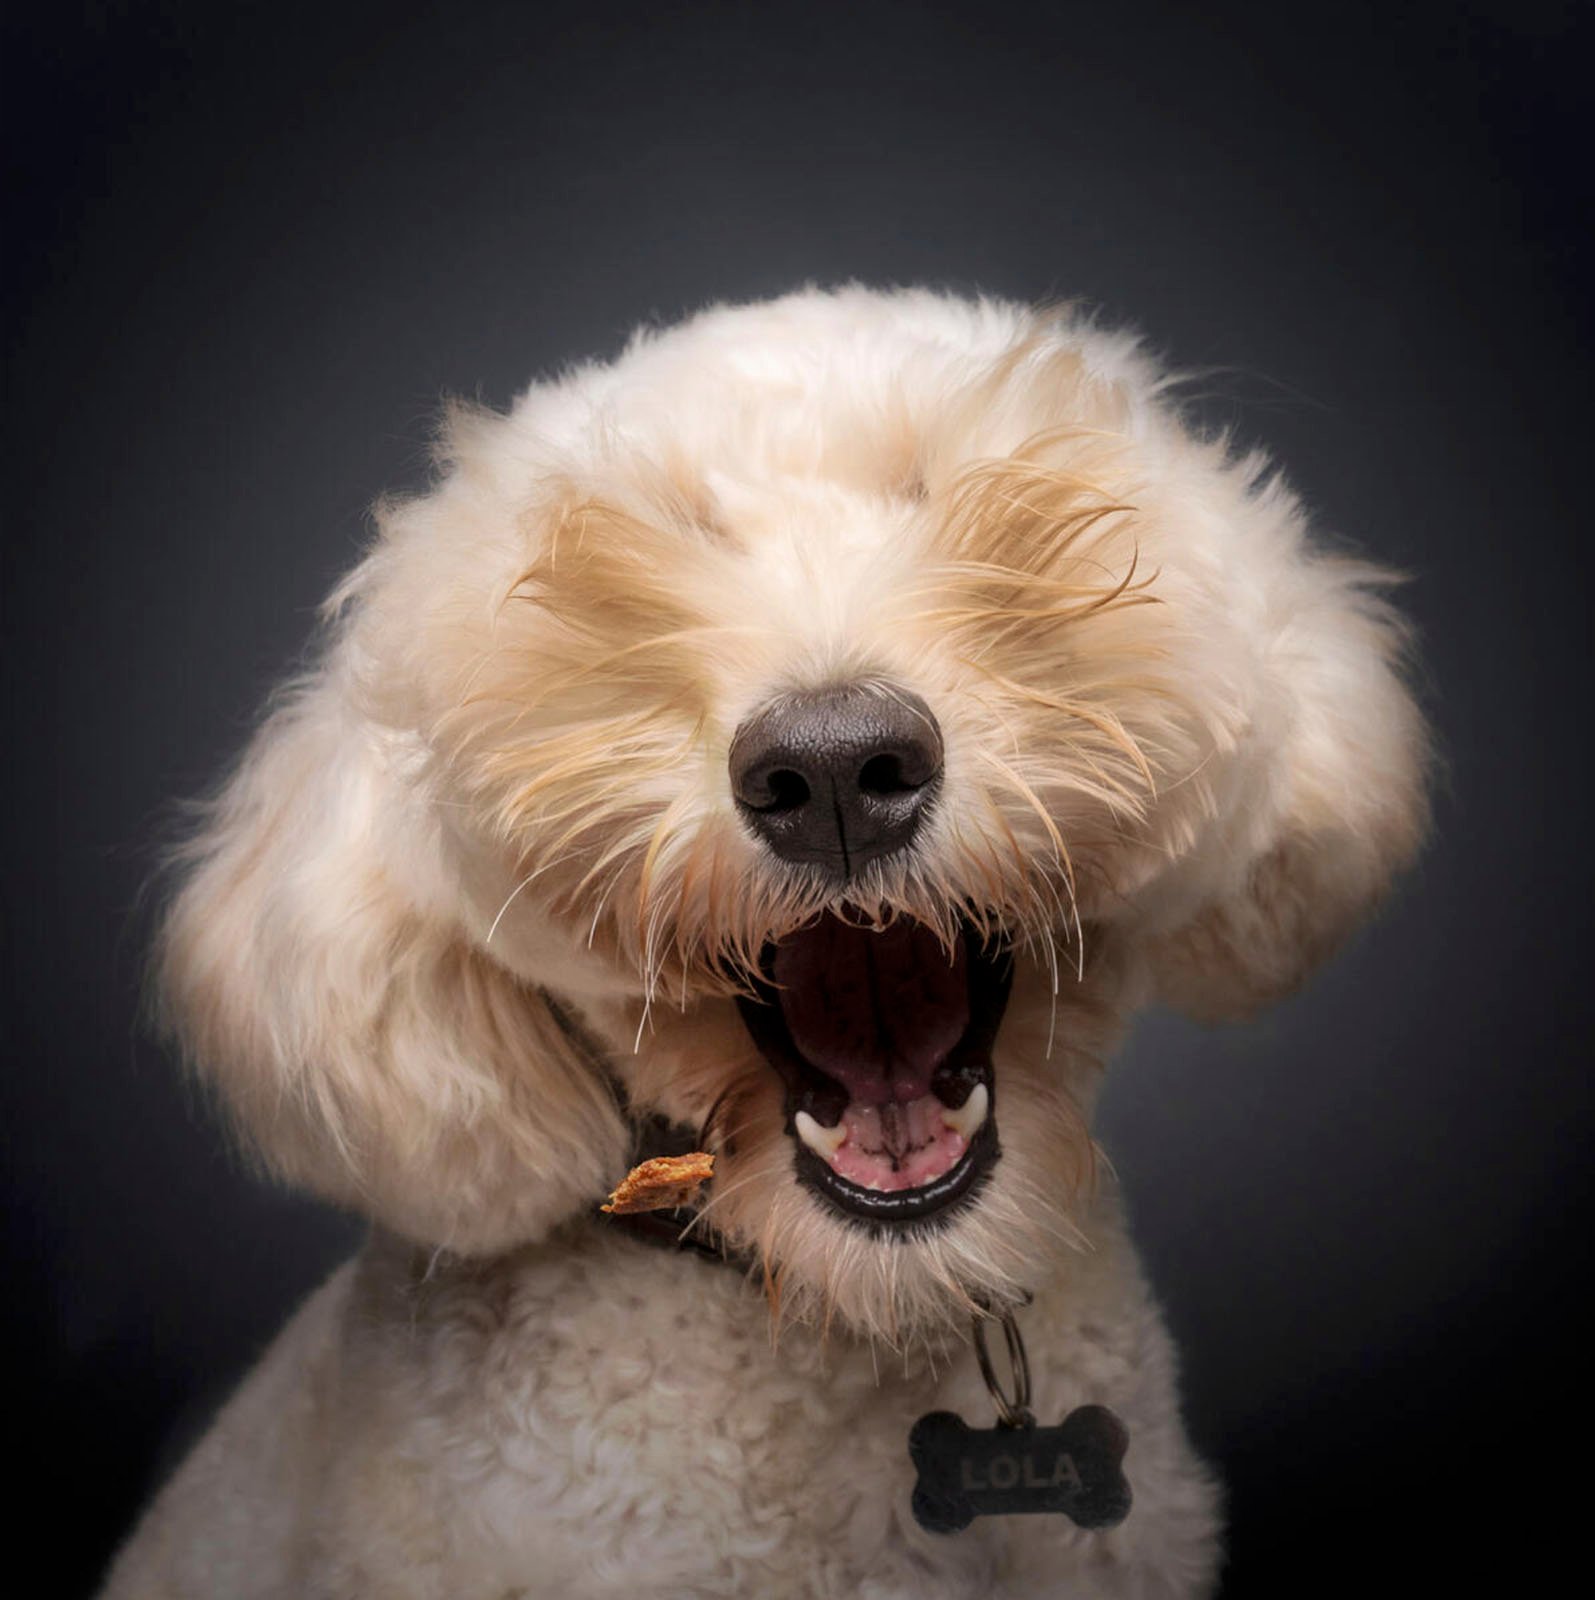 A fluffy white dog with its hair covering its eyes, mouth wide open mid-bark or yawn. The tag on its collar reads "LOLA." The background is a soft, dark gray.